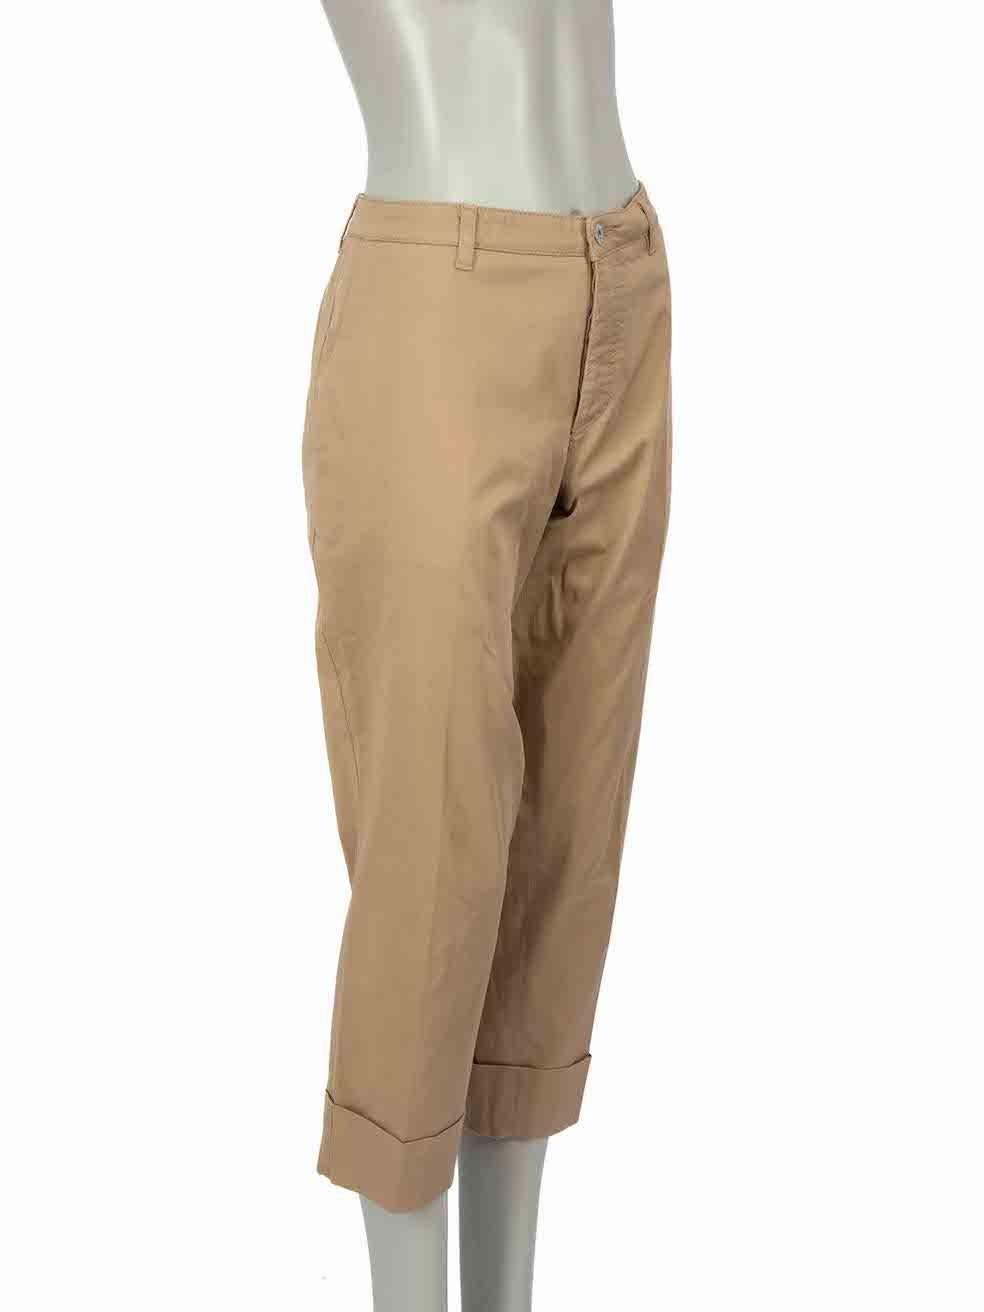 CONDITION is Very good. Hardly any visible wear to trousers is evident on this used Miu Miu designer resale item.
 
Details
Beige
Cotton
Chino trousers
Tapered fit
Cropped
Mid rise
Button up fastening
2x Side pockets 
2x Back pockets
  
Made in